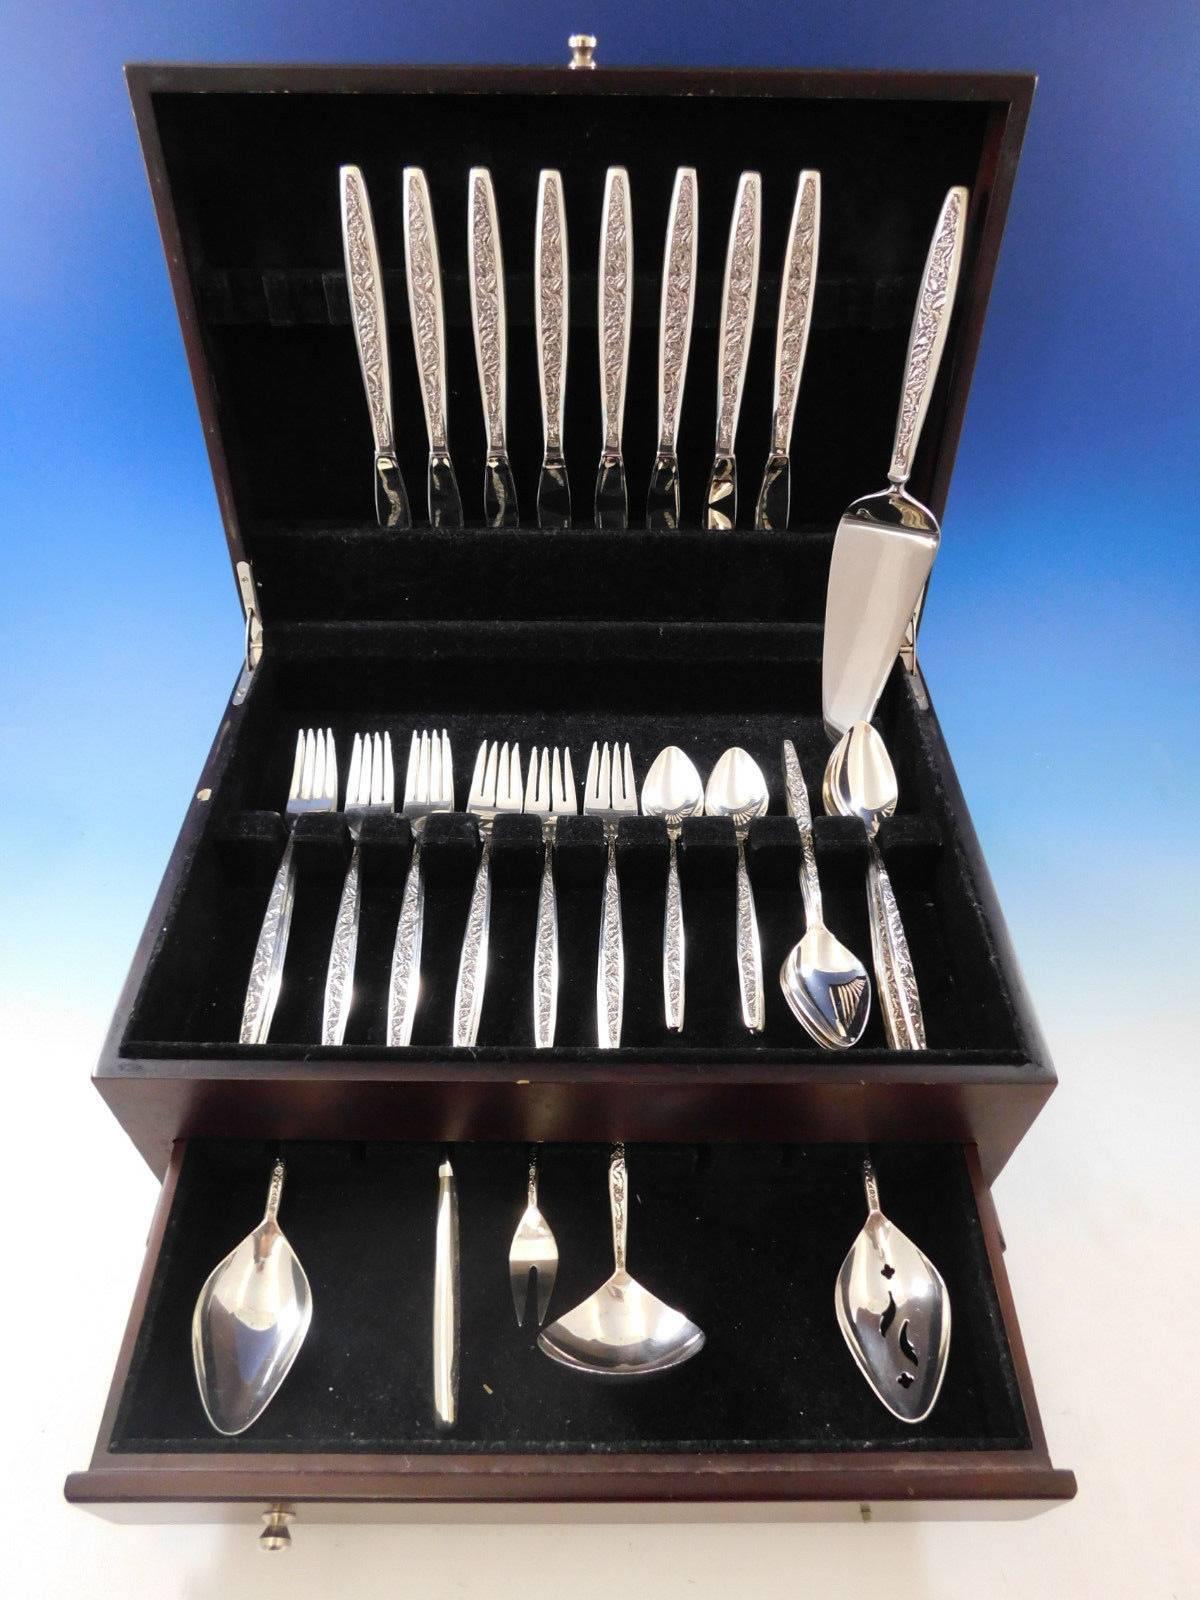 Valencia by International sterling silver flatware set, 46 pieces. The Valencia pattern was introduced in the year 1964 and features a contemporary shaped handle with an all-over decorative floral and leaf pattern on the front. This set